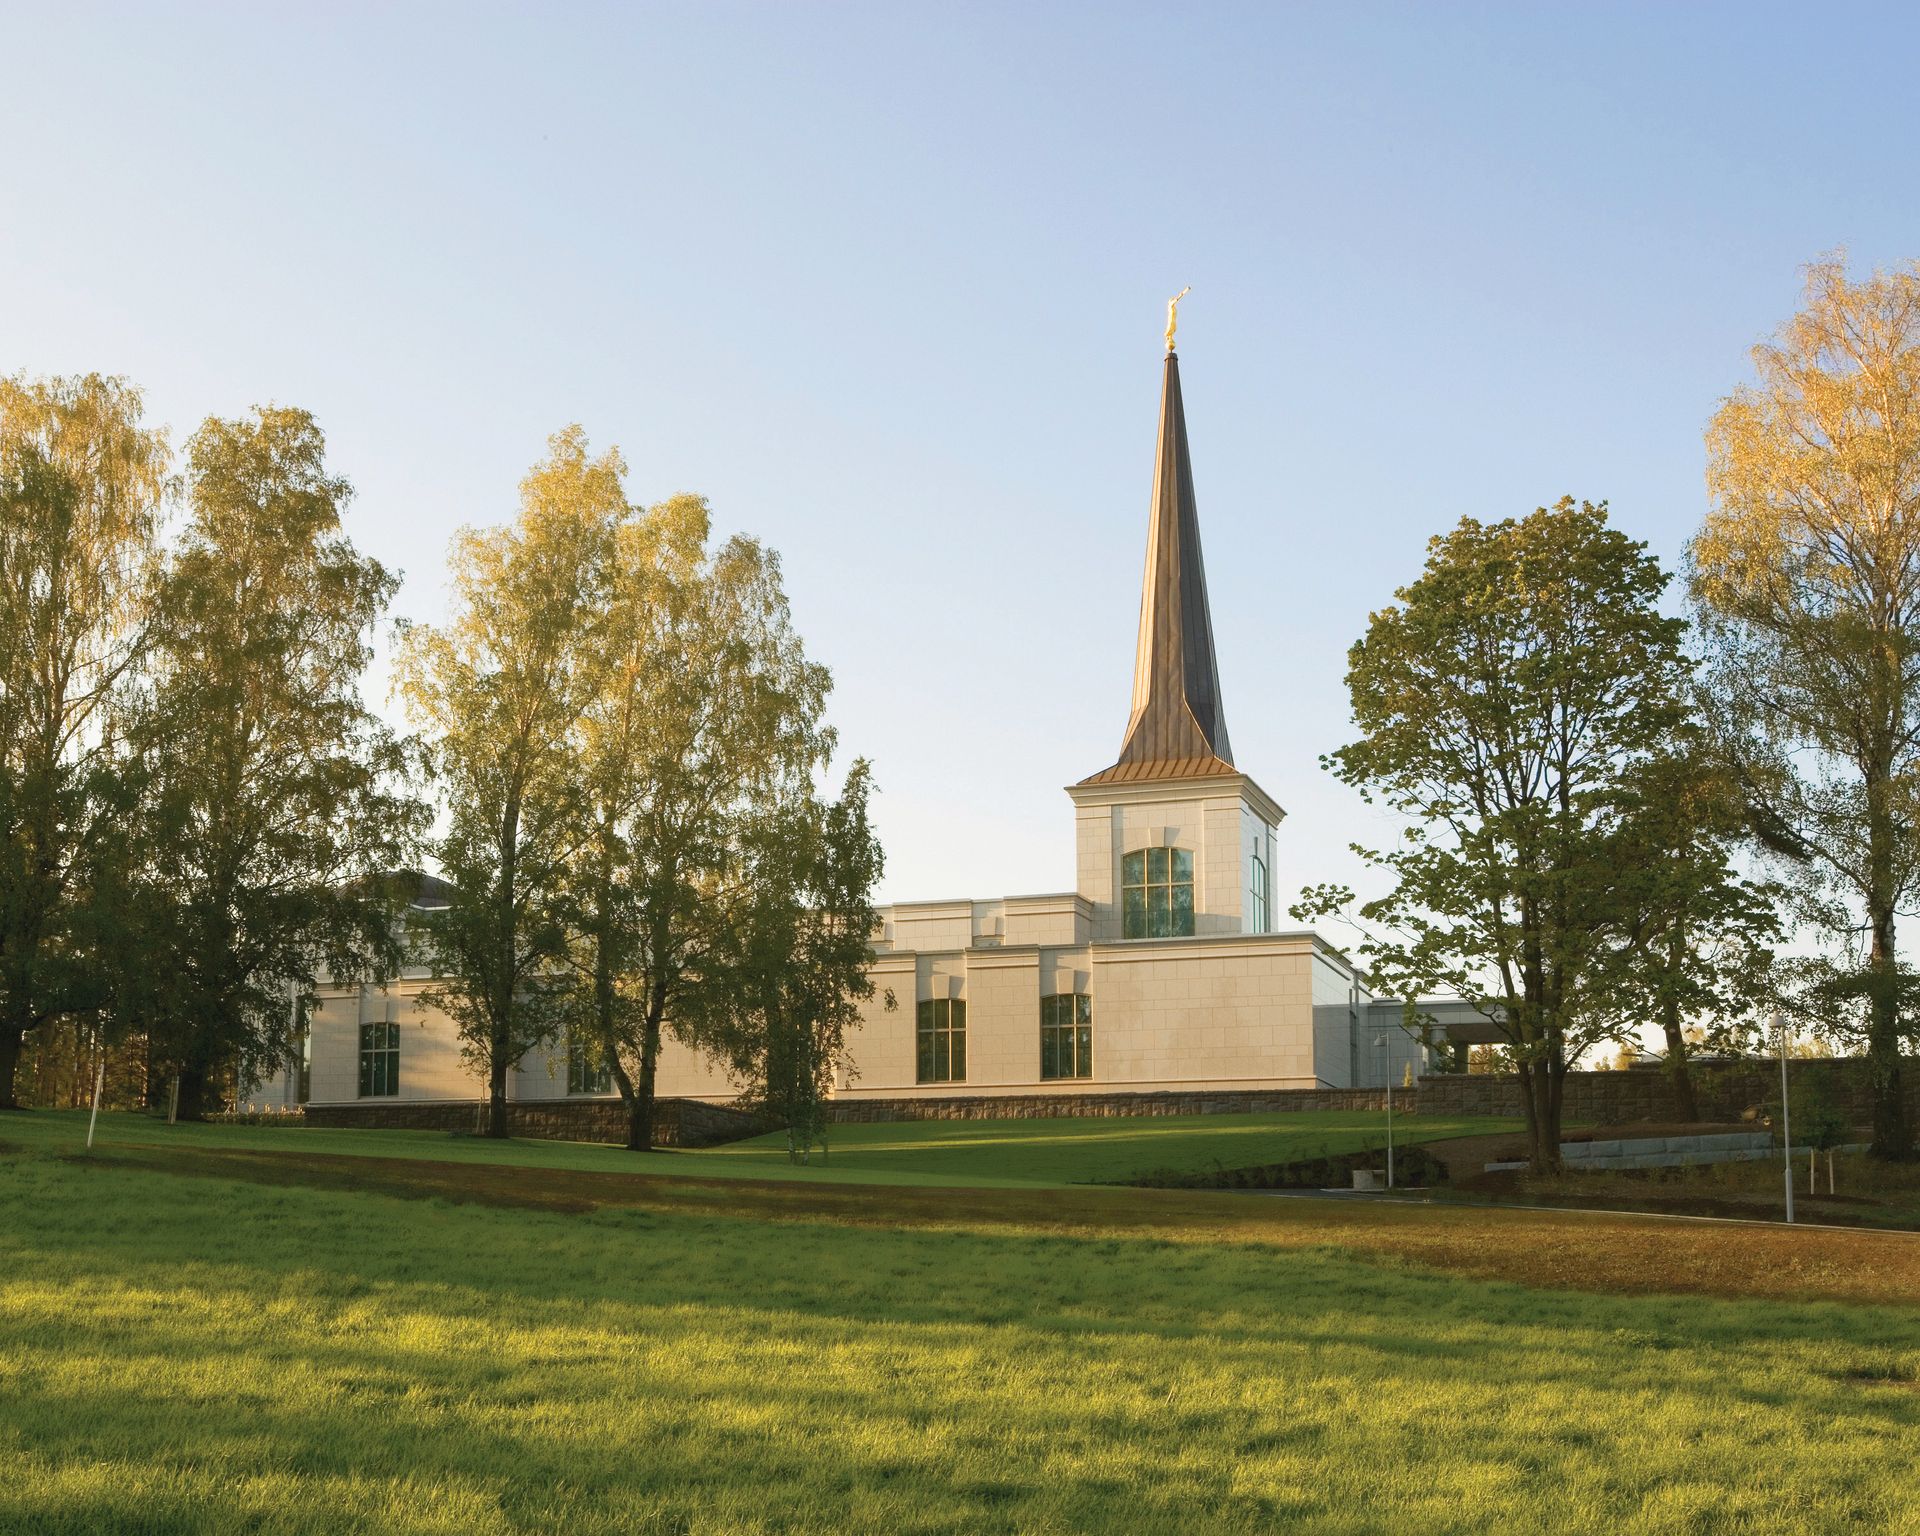 An exterior view of the Helsinki Finland Temple and grounds at sunset.